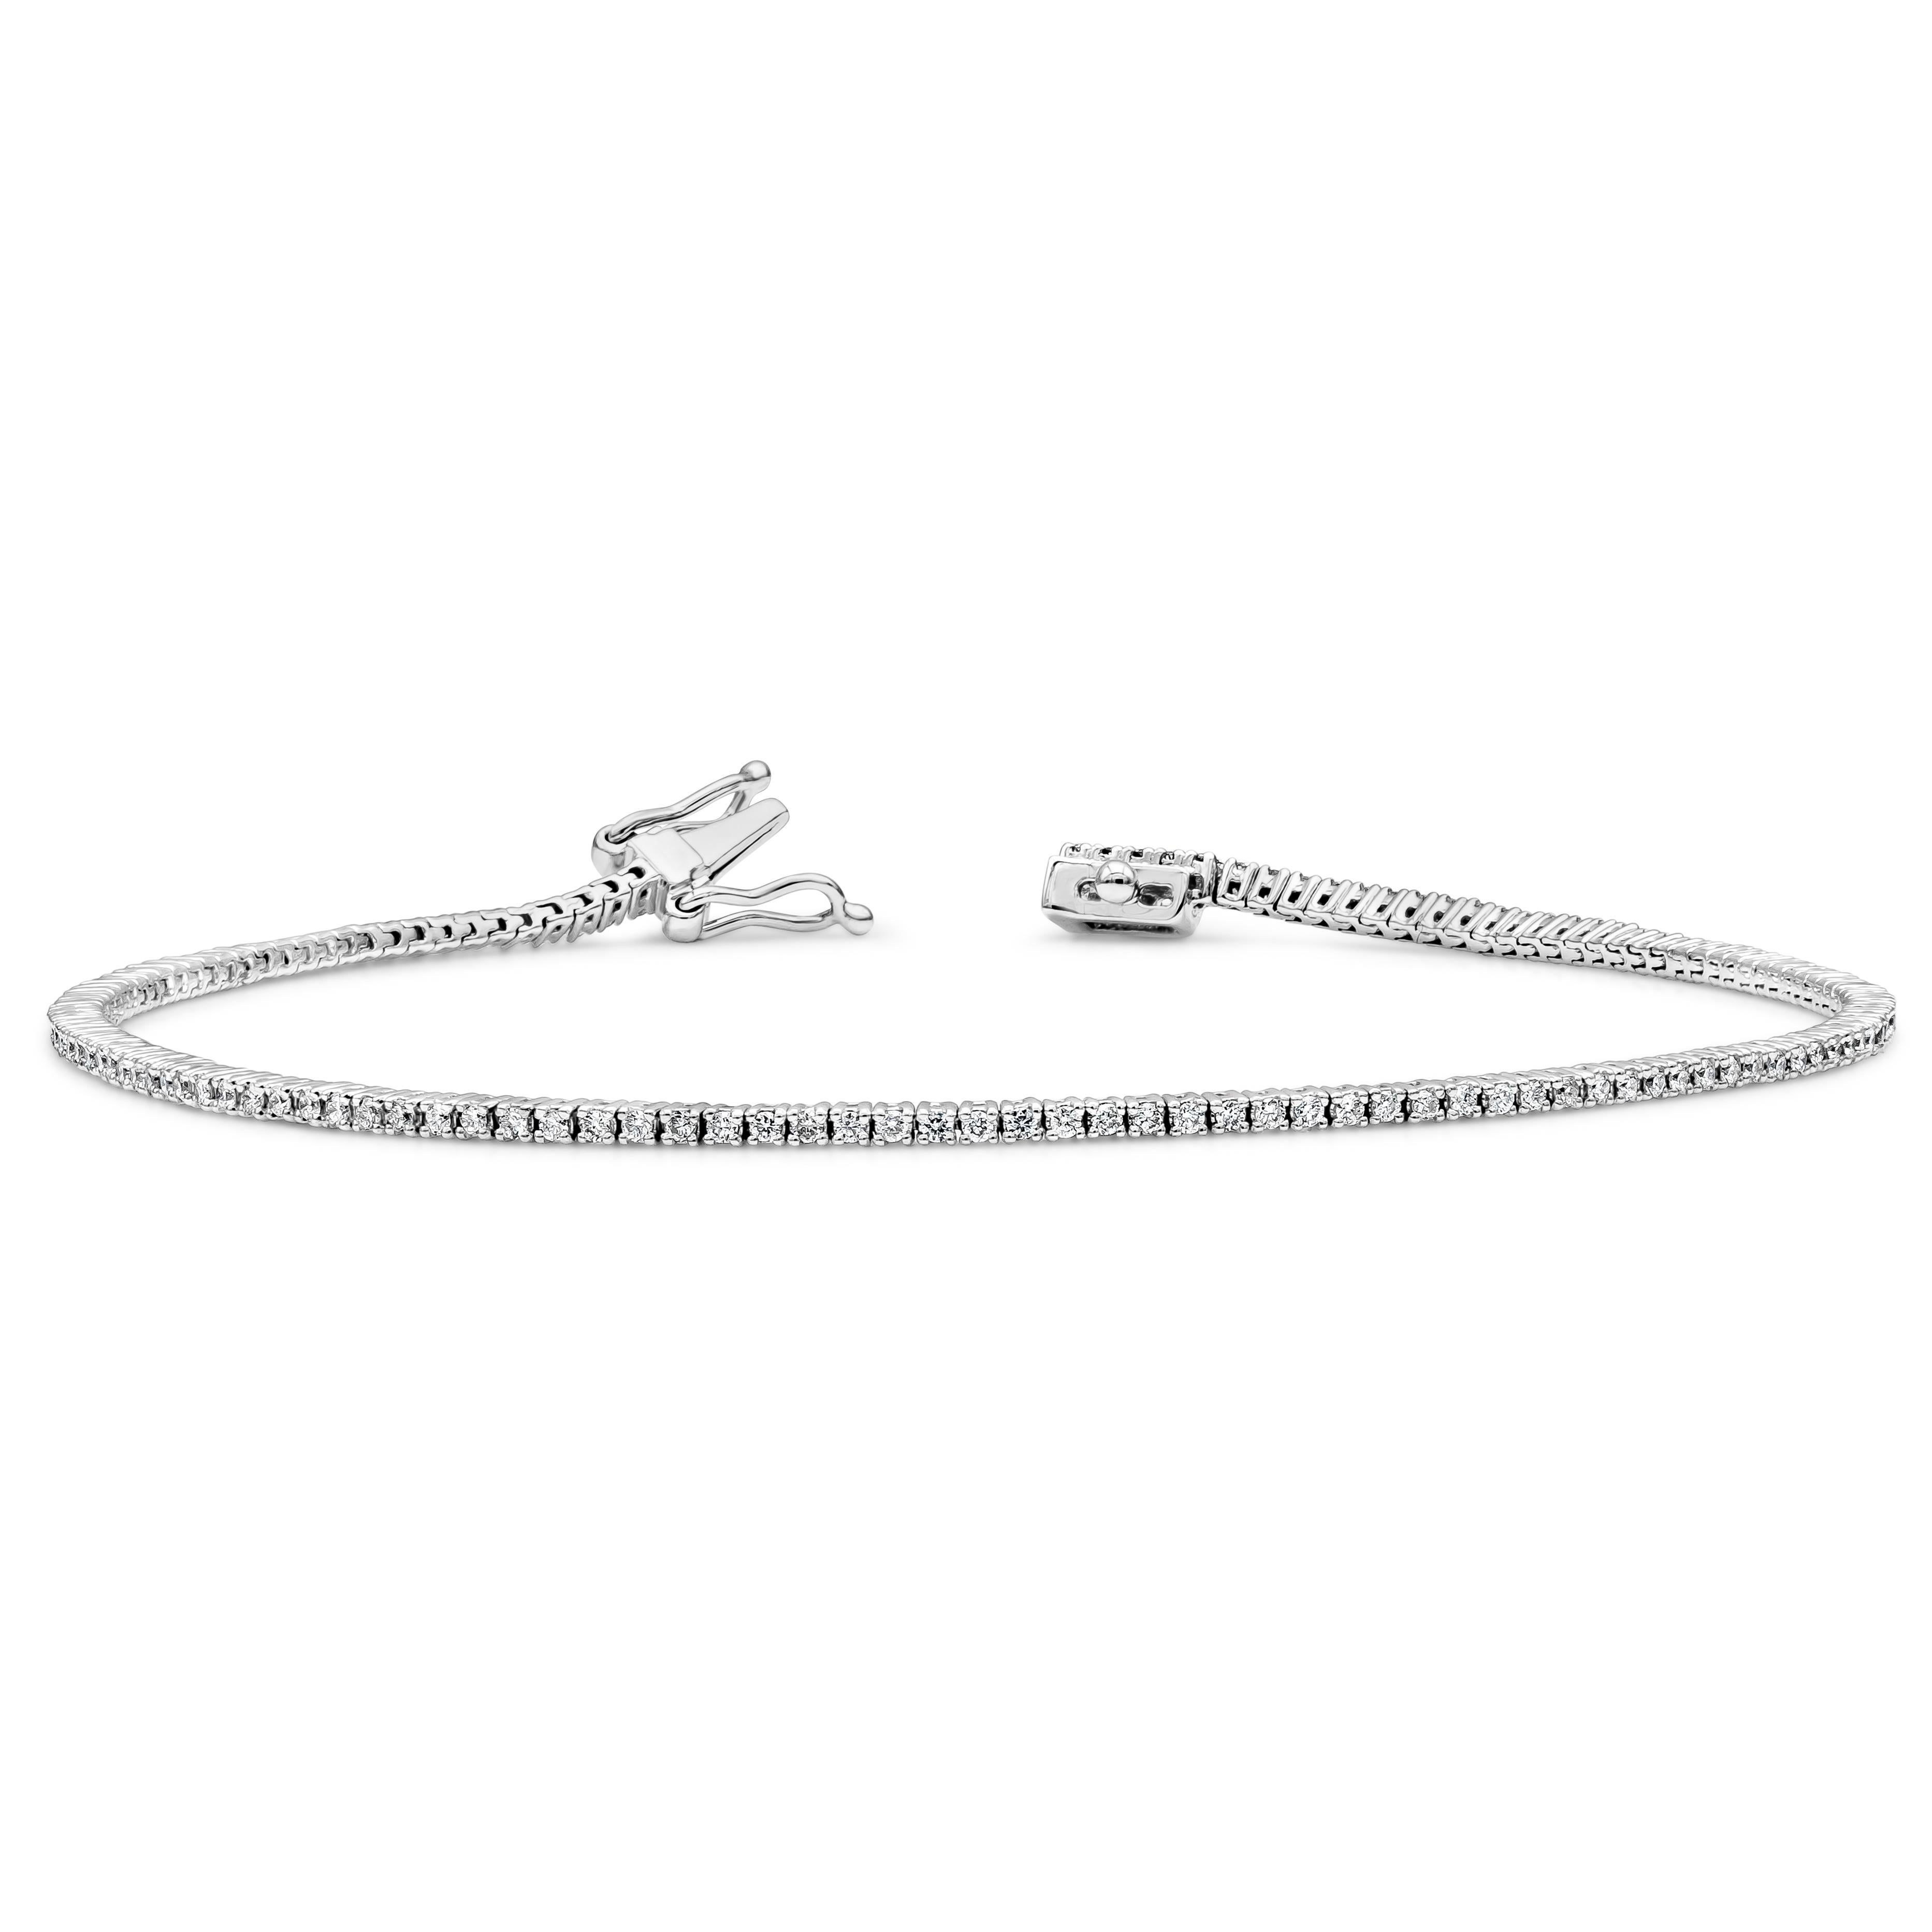 A classic tennis bracelet style showcasing 139 round brilliant diamonds weighing 0.56 carats total, F color and SI in clarity. 7 inches in Length.Made in 18K White Gold.

Roman Malakov is a custom house, specializing in creating anything you can